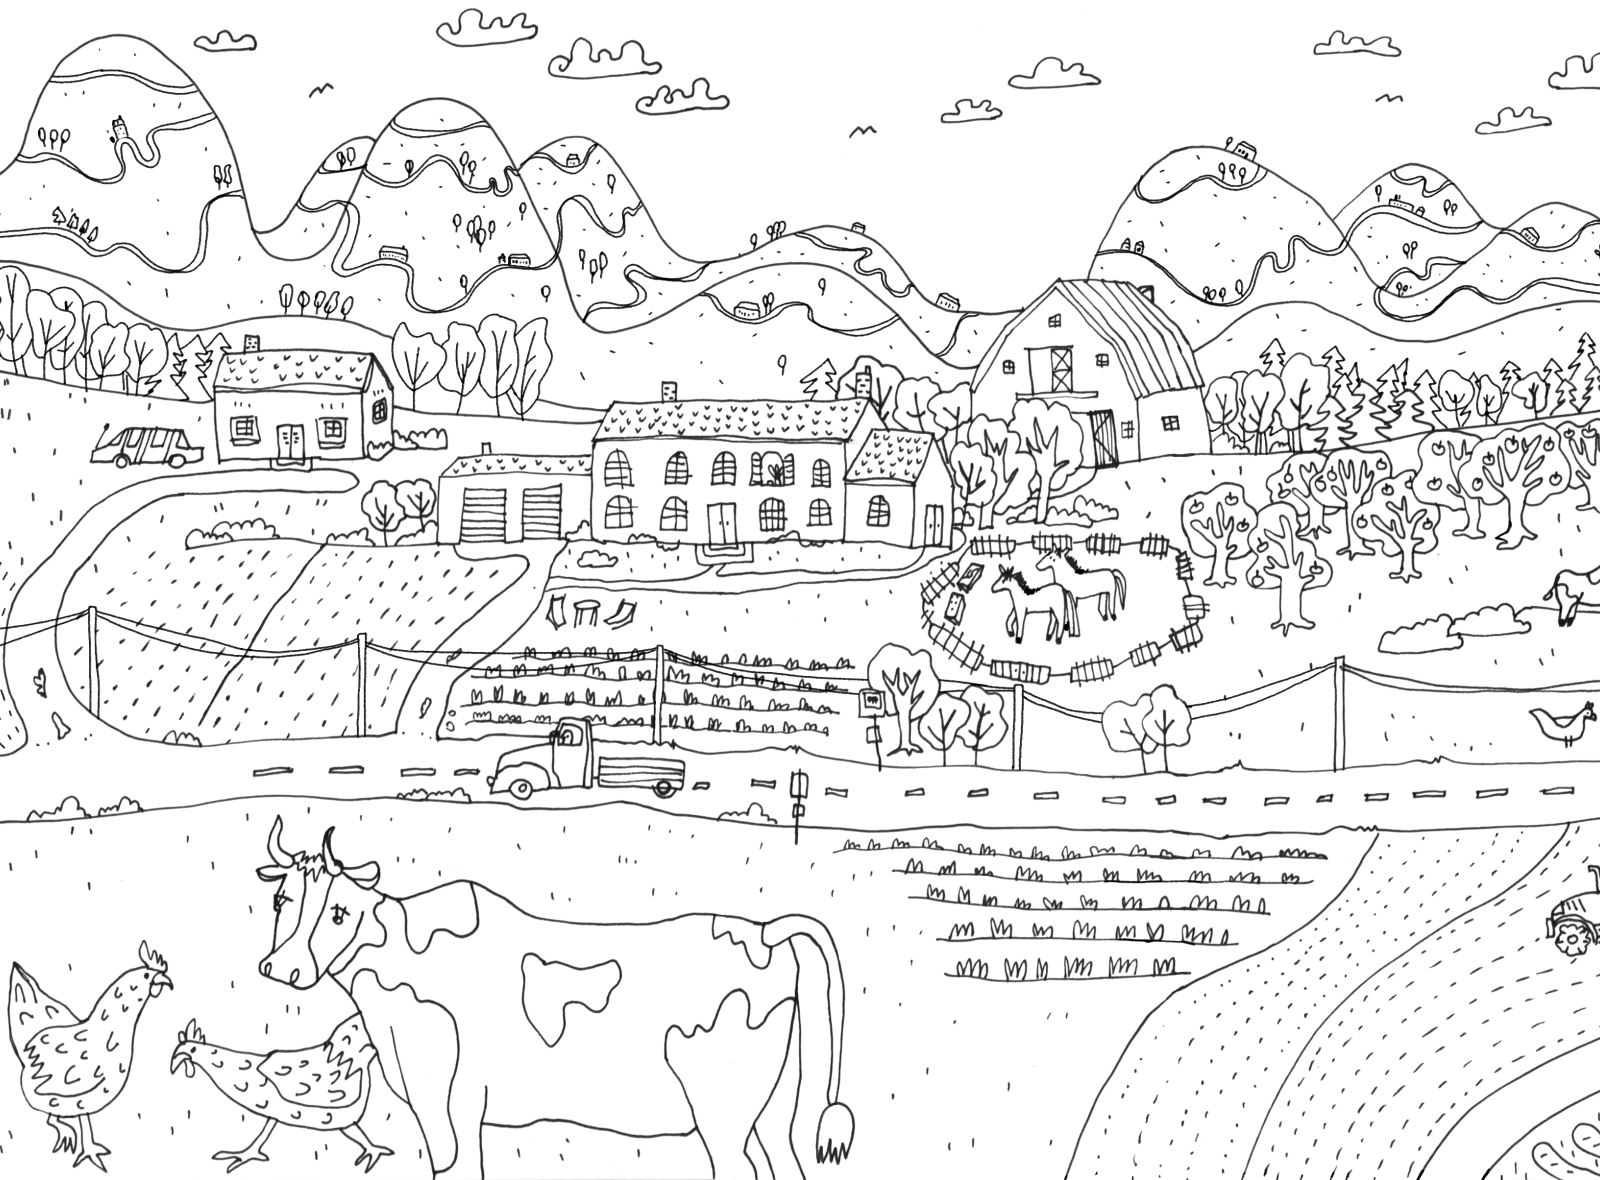 Download Coloring Book The Farm By Hananapa On Dribbble